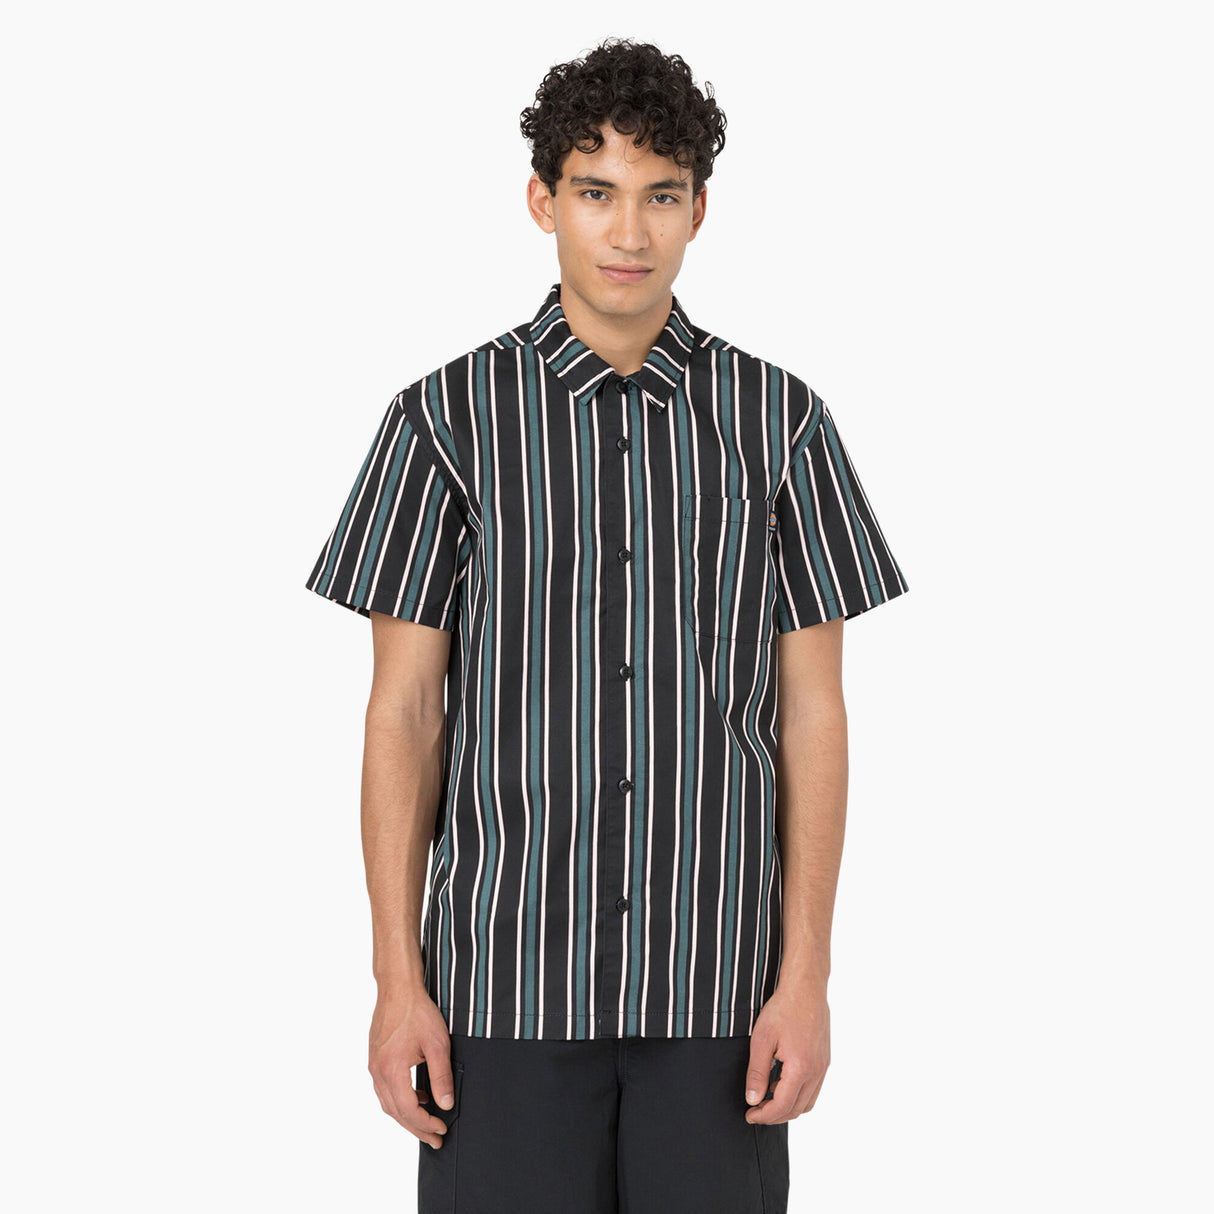 Dickies Skateboarding Lincoln Green/Black Stripe Cooling Relaxed Fit Button Up Shirt